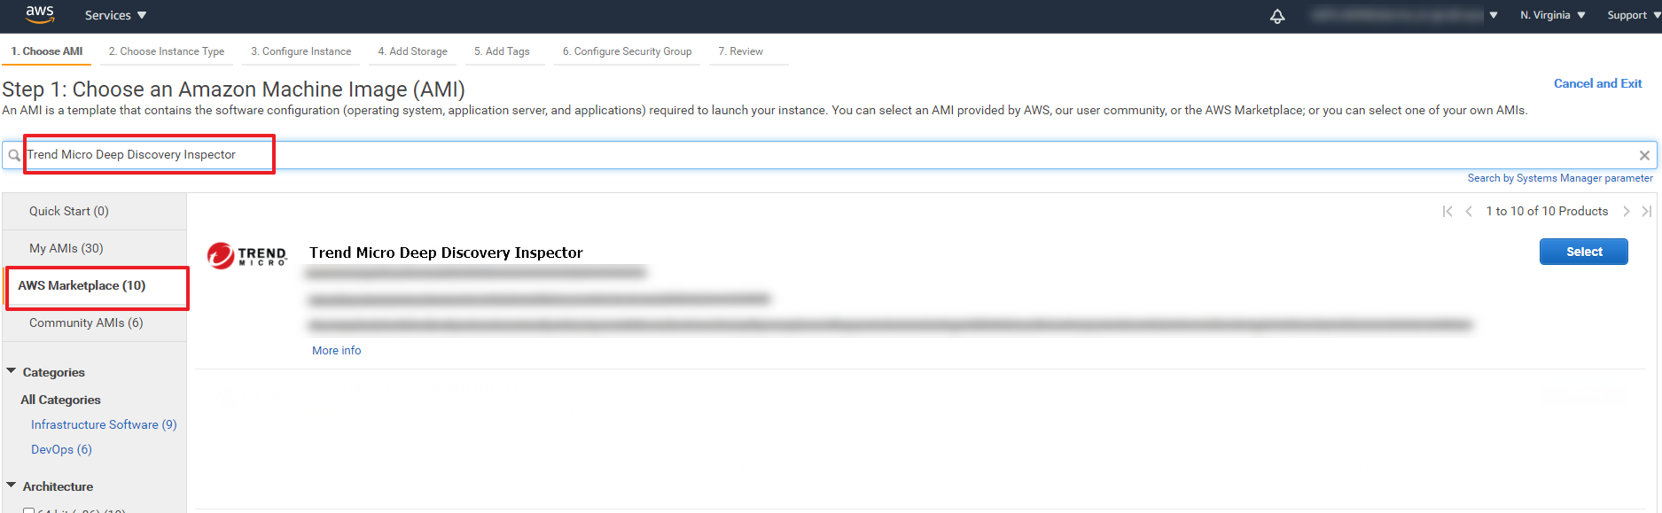 aws-marketplace.png